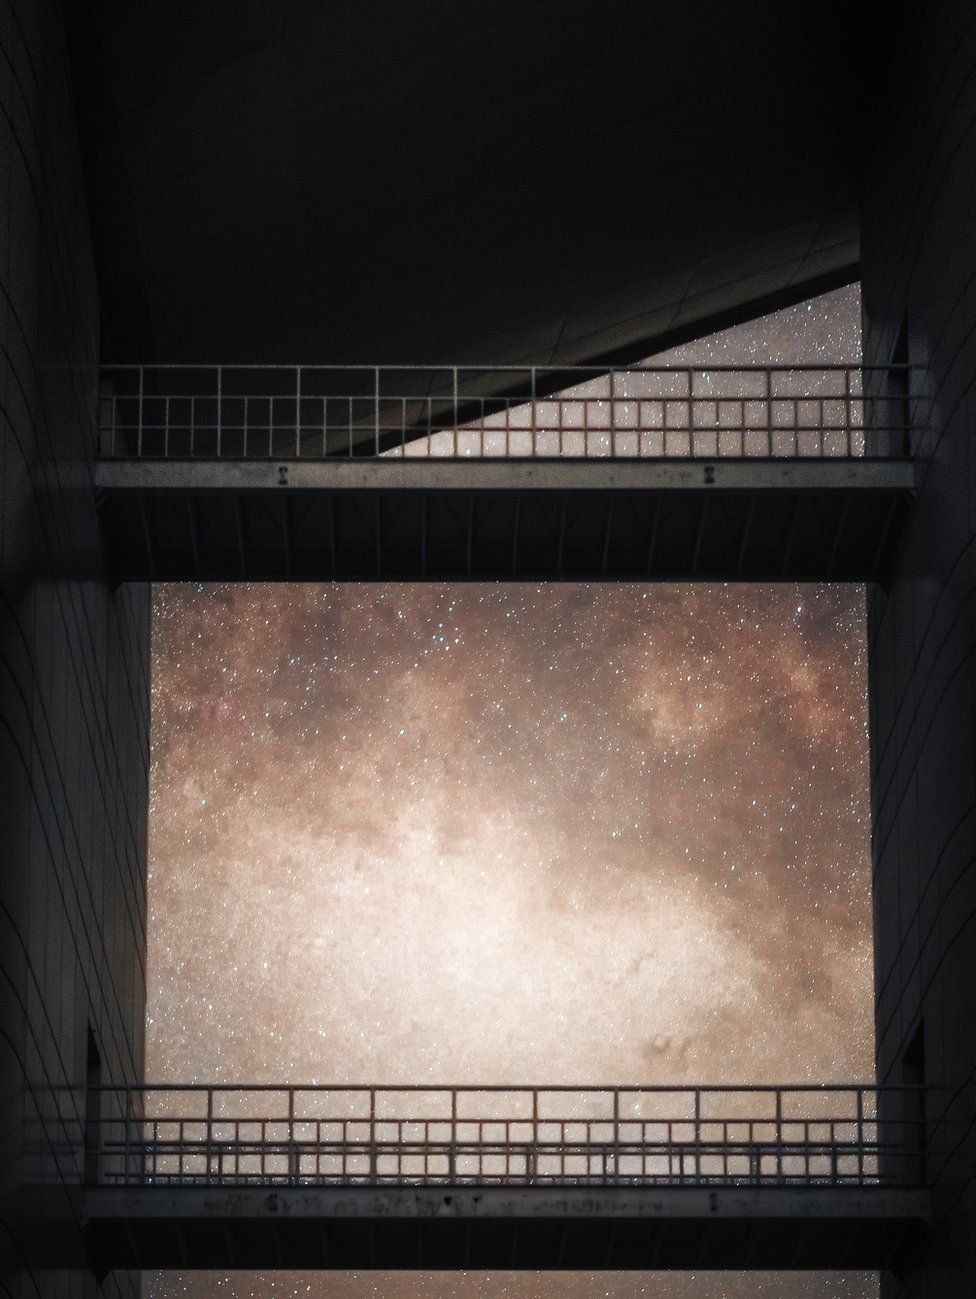 The milky way viewed through the minimalist outdoor passageway at the National Astronomical Observatory of China